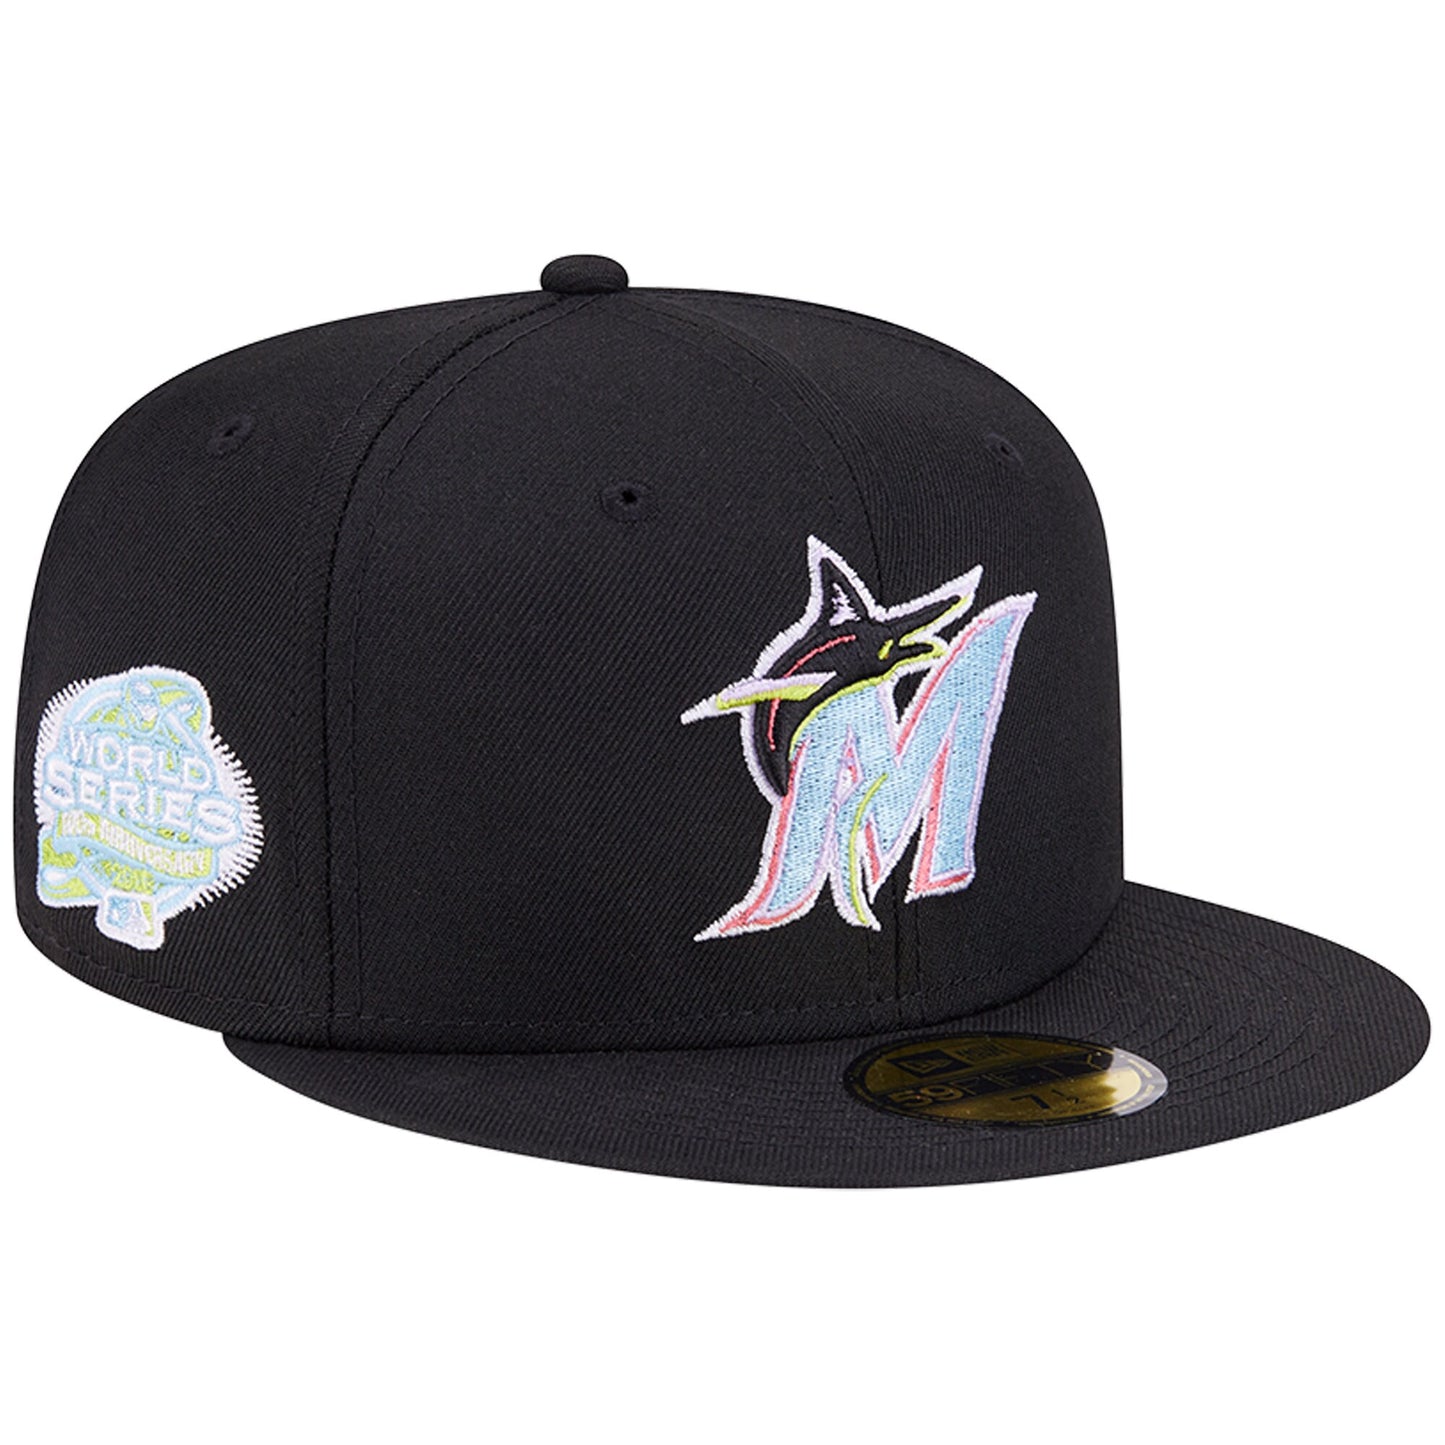 Miami Marlins New Era Multi-Color Pack 59FIFTY Fitted Hat - Black